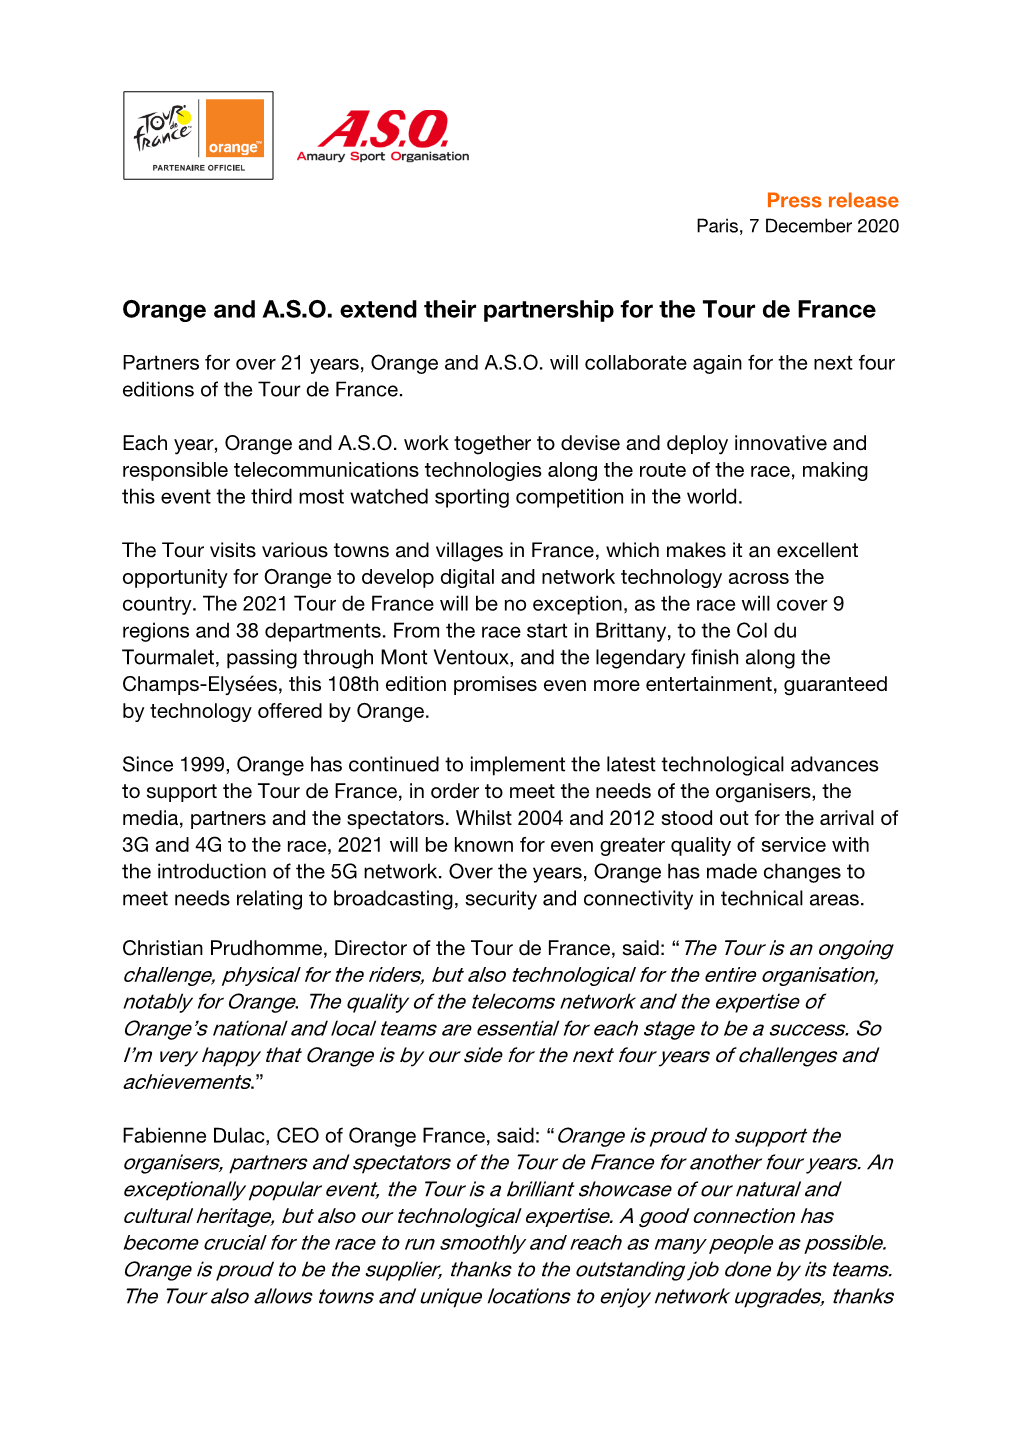 Orange and ASO Extend Their Partnership for the Tour De France